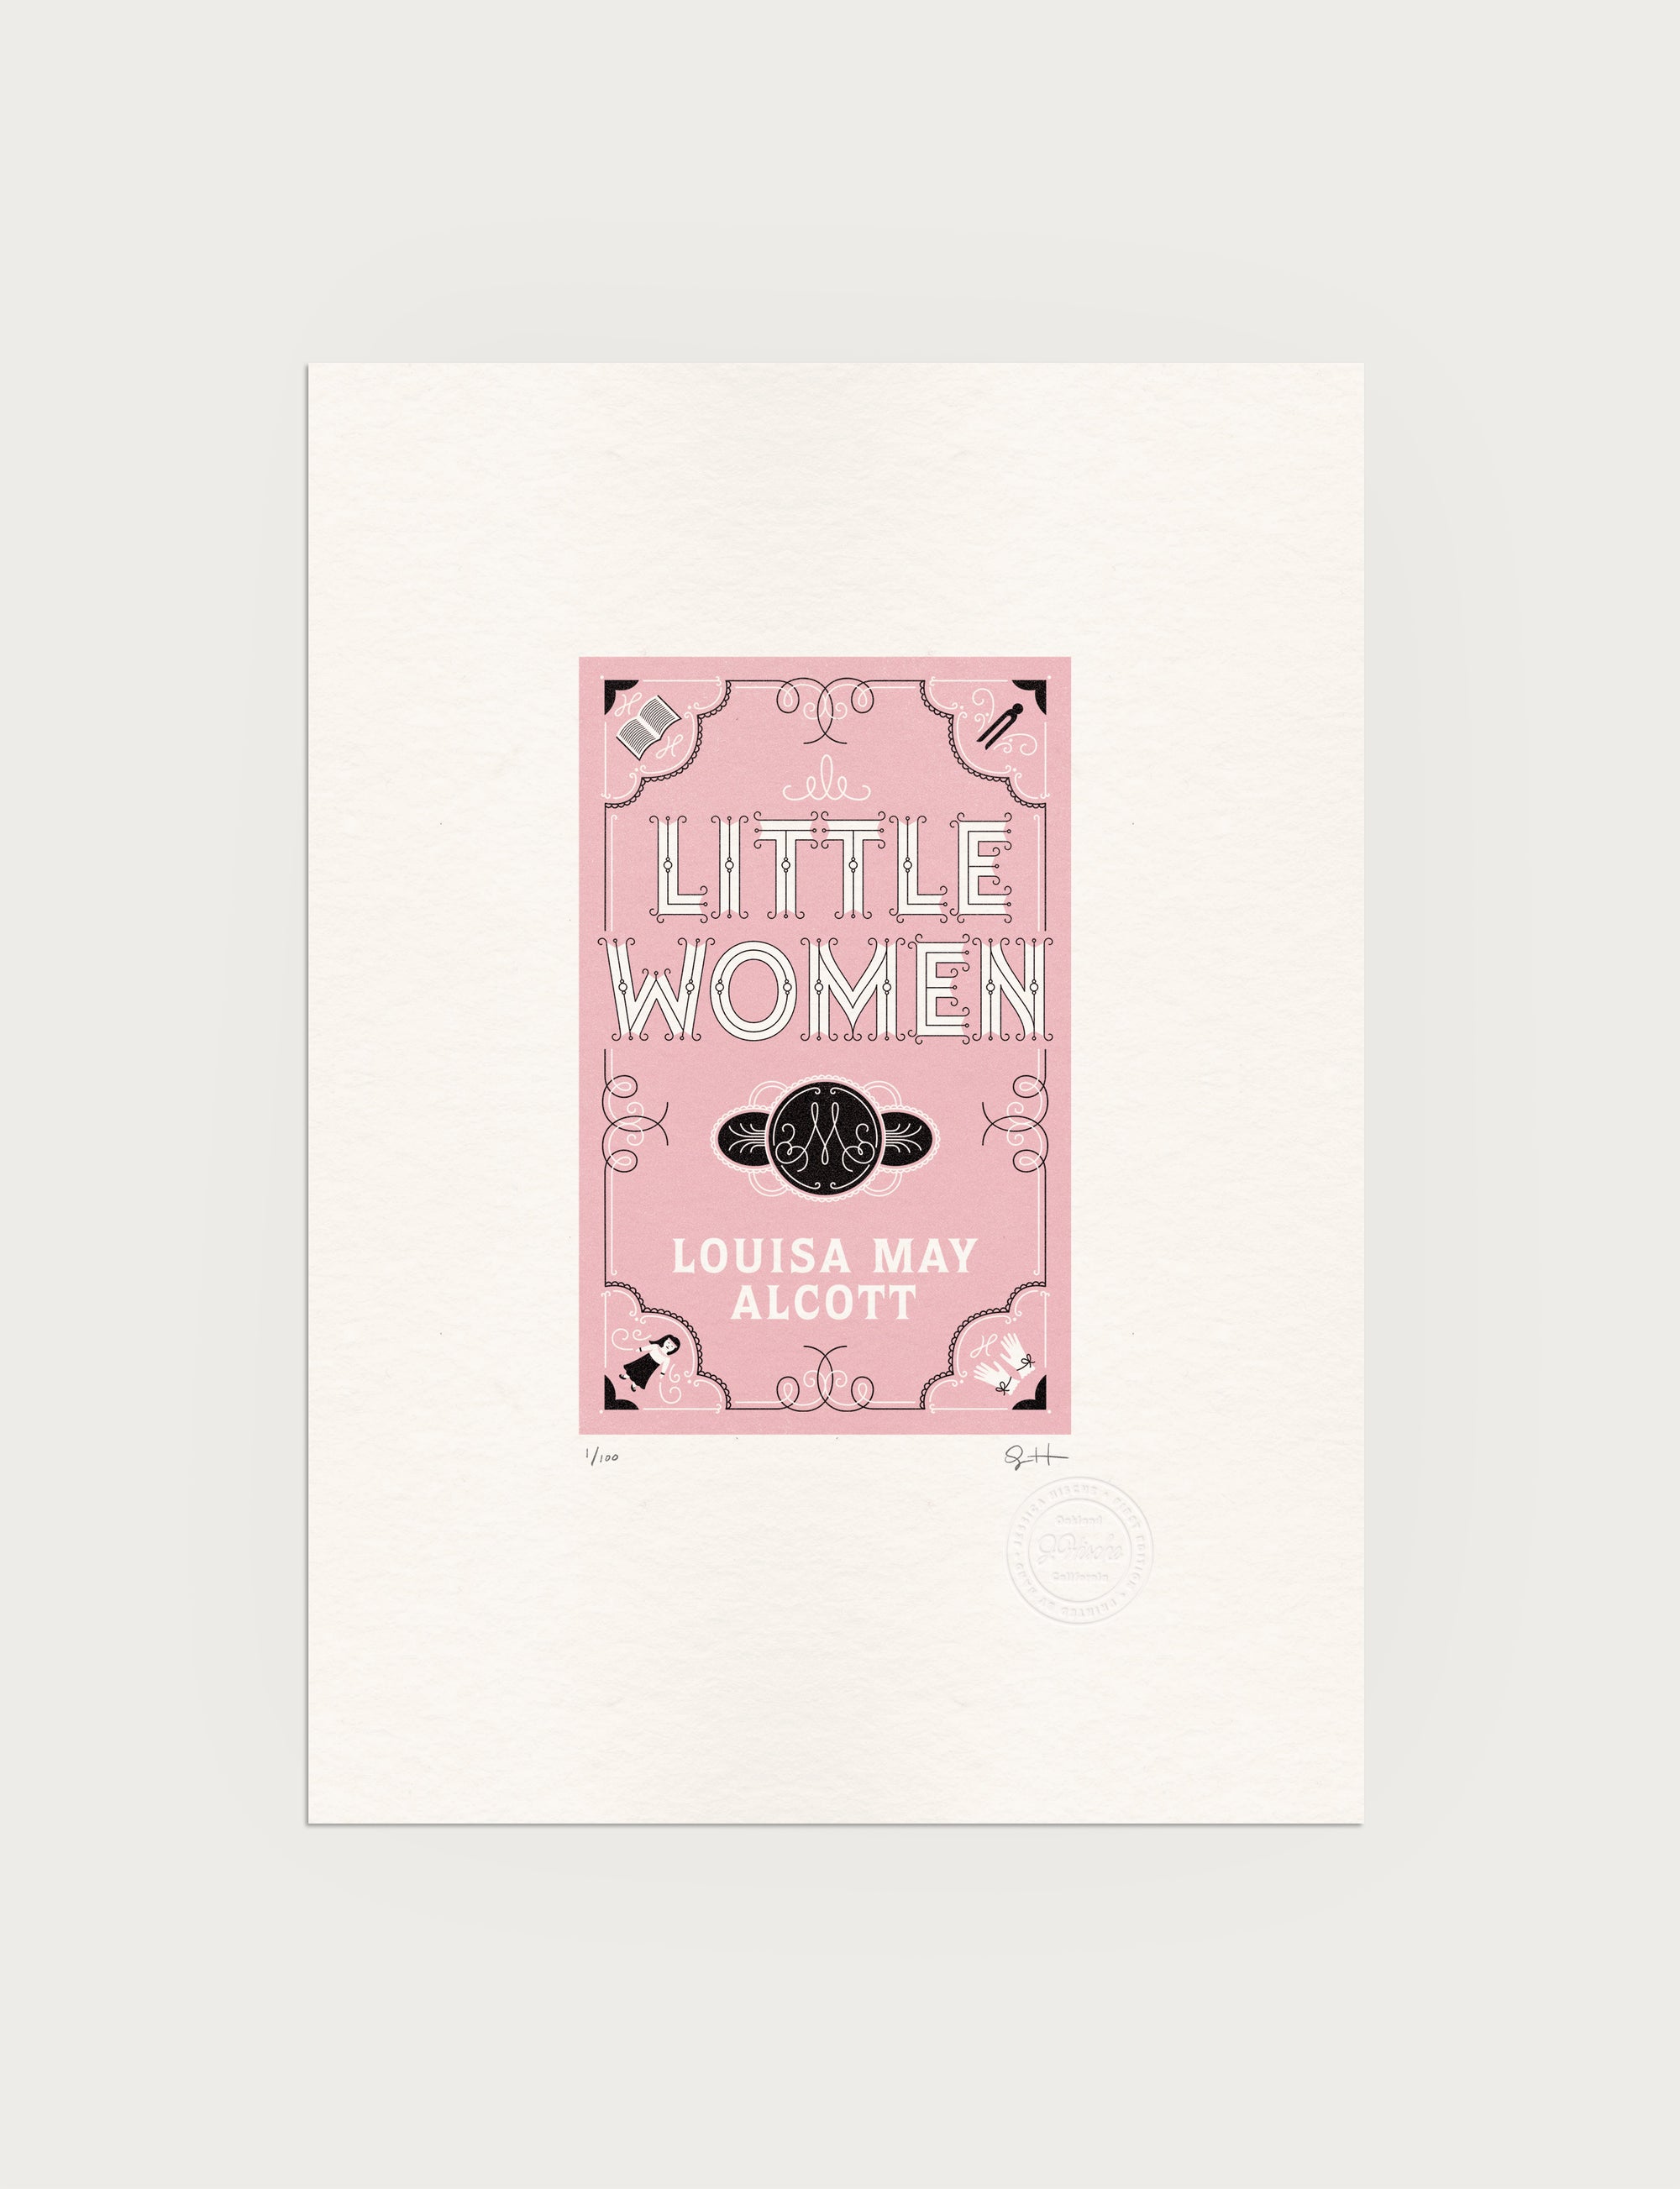 2-color letterpress print in pink and black. Printed artwork is an illustrated book cover of Little Women including custom hand lettering.